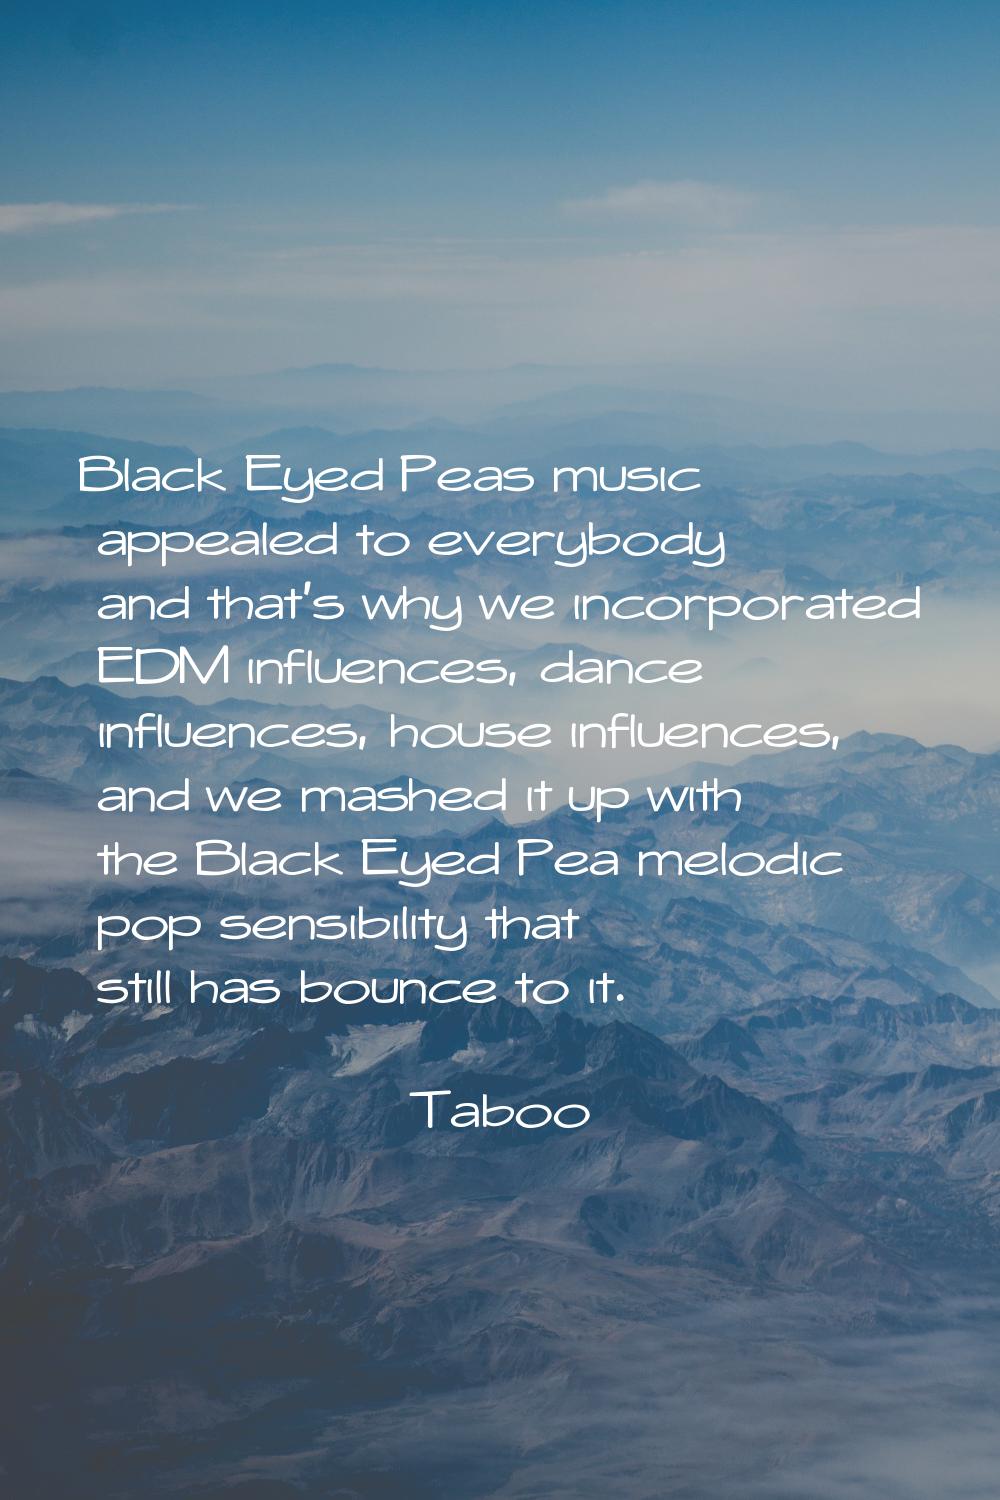 Black Eyed Peas music appealed to everybody and that's why we incorporated EDM influences, dance in